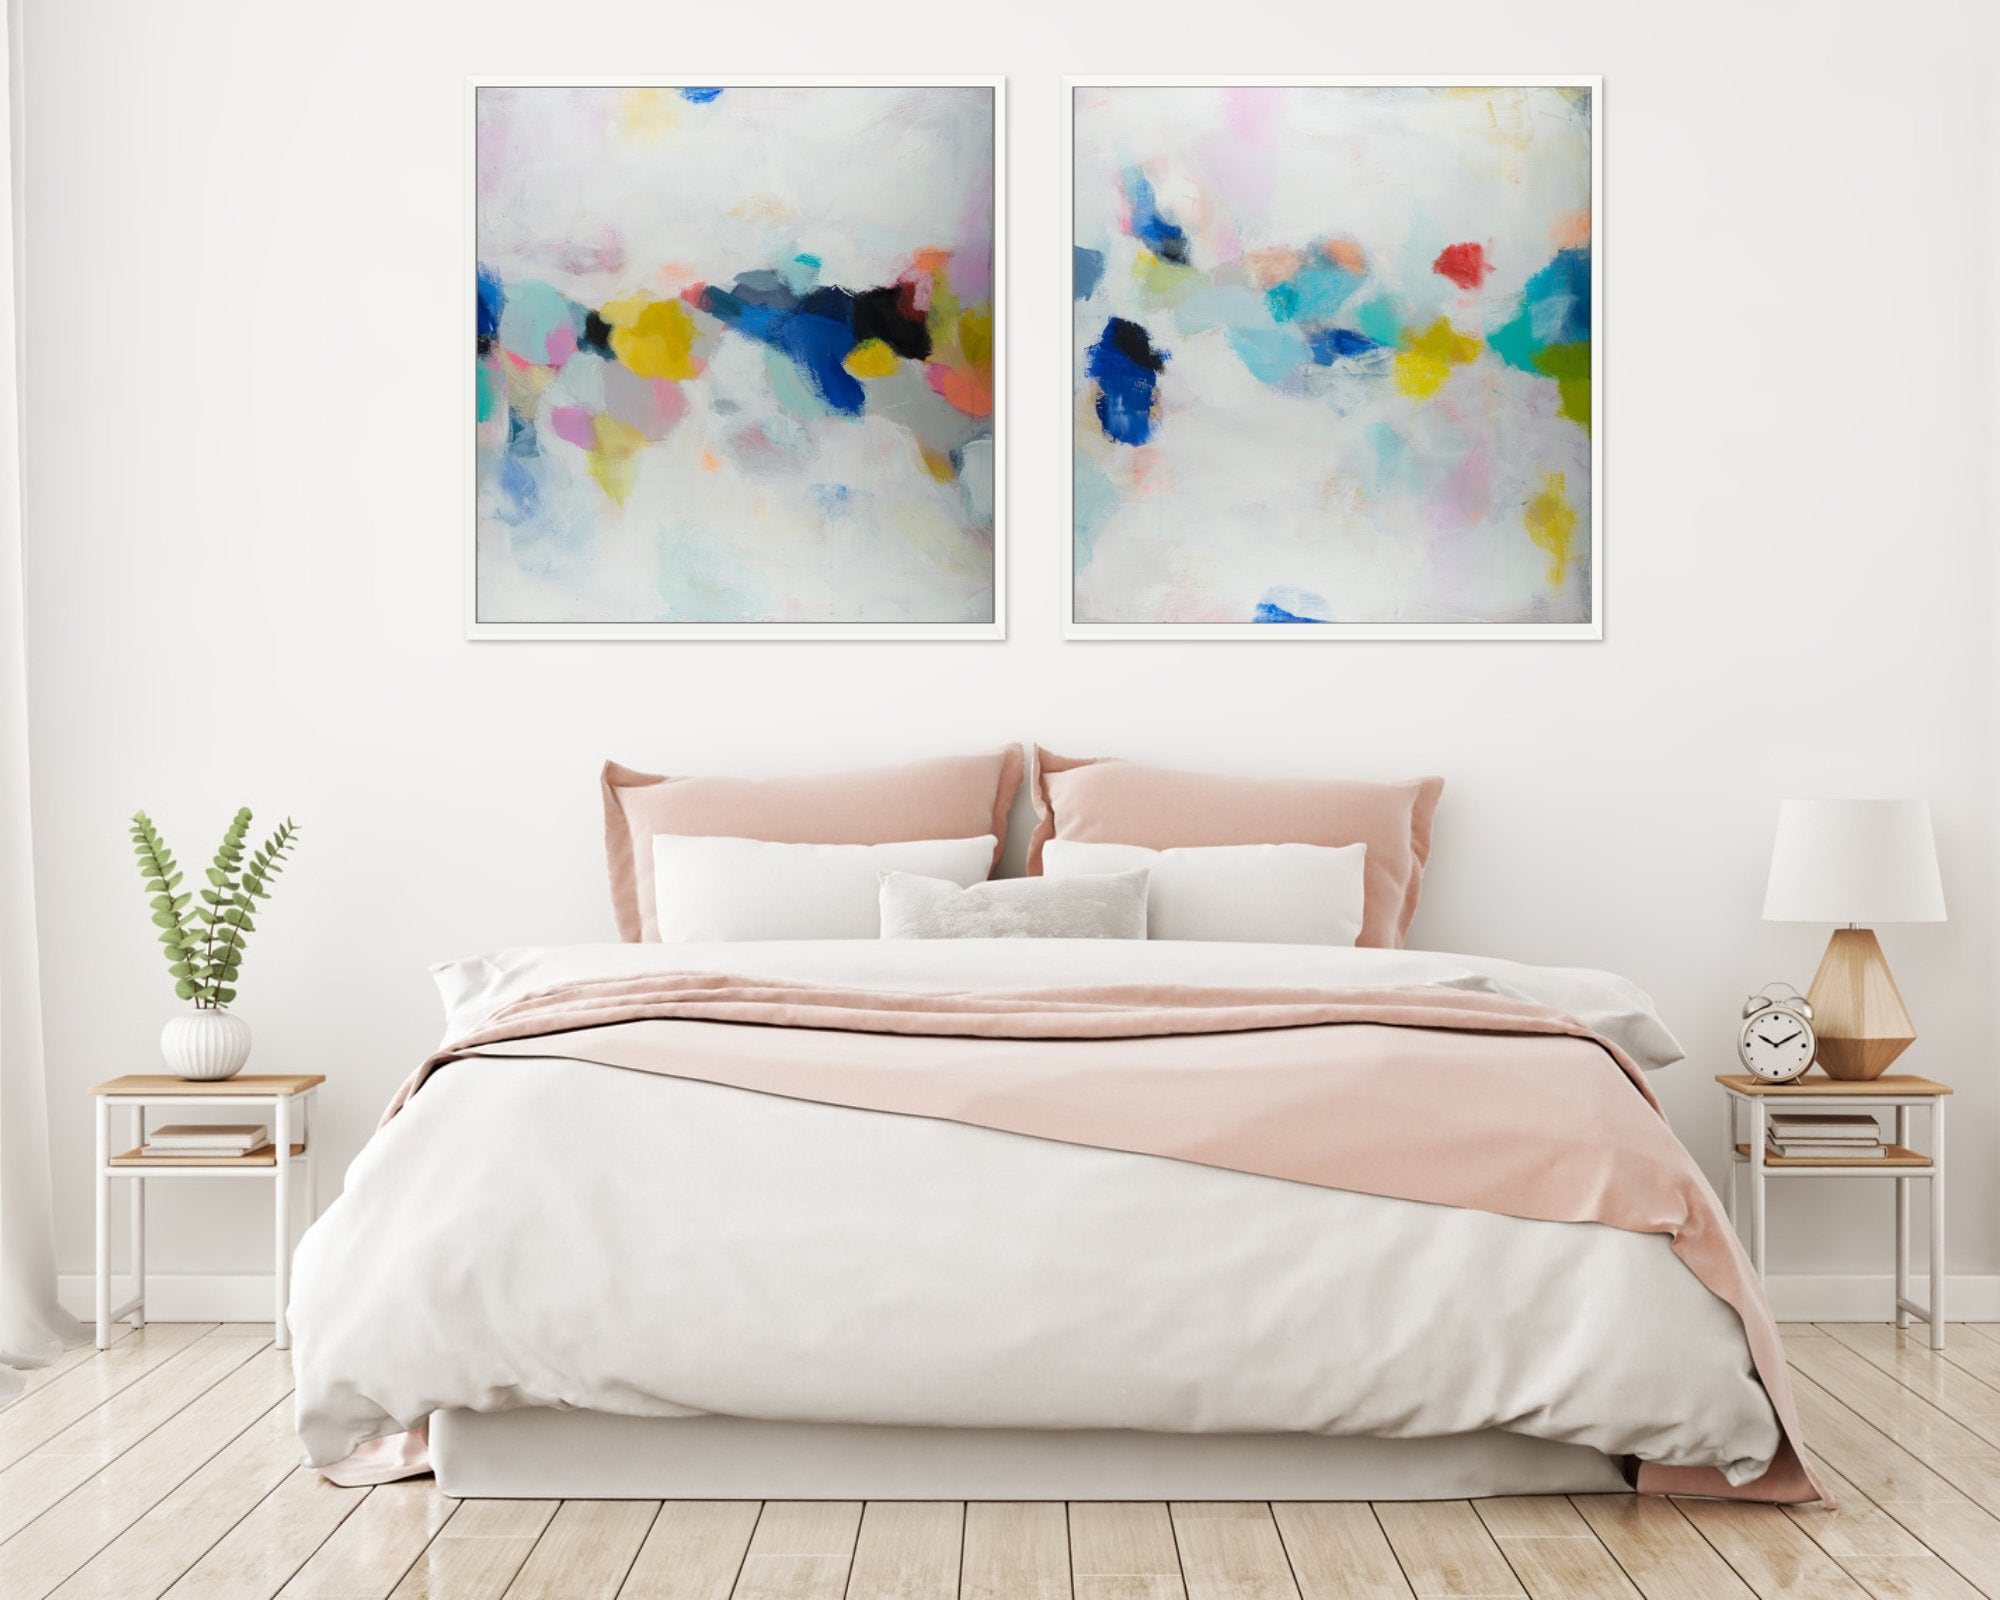 Set of 2 extra large colorful prints, Acrylic Abstract Painting prints of Original Wall Art, abstract wall art, large abstract art